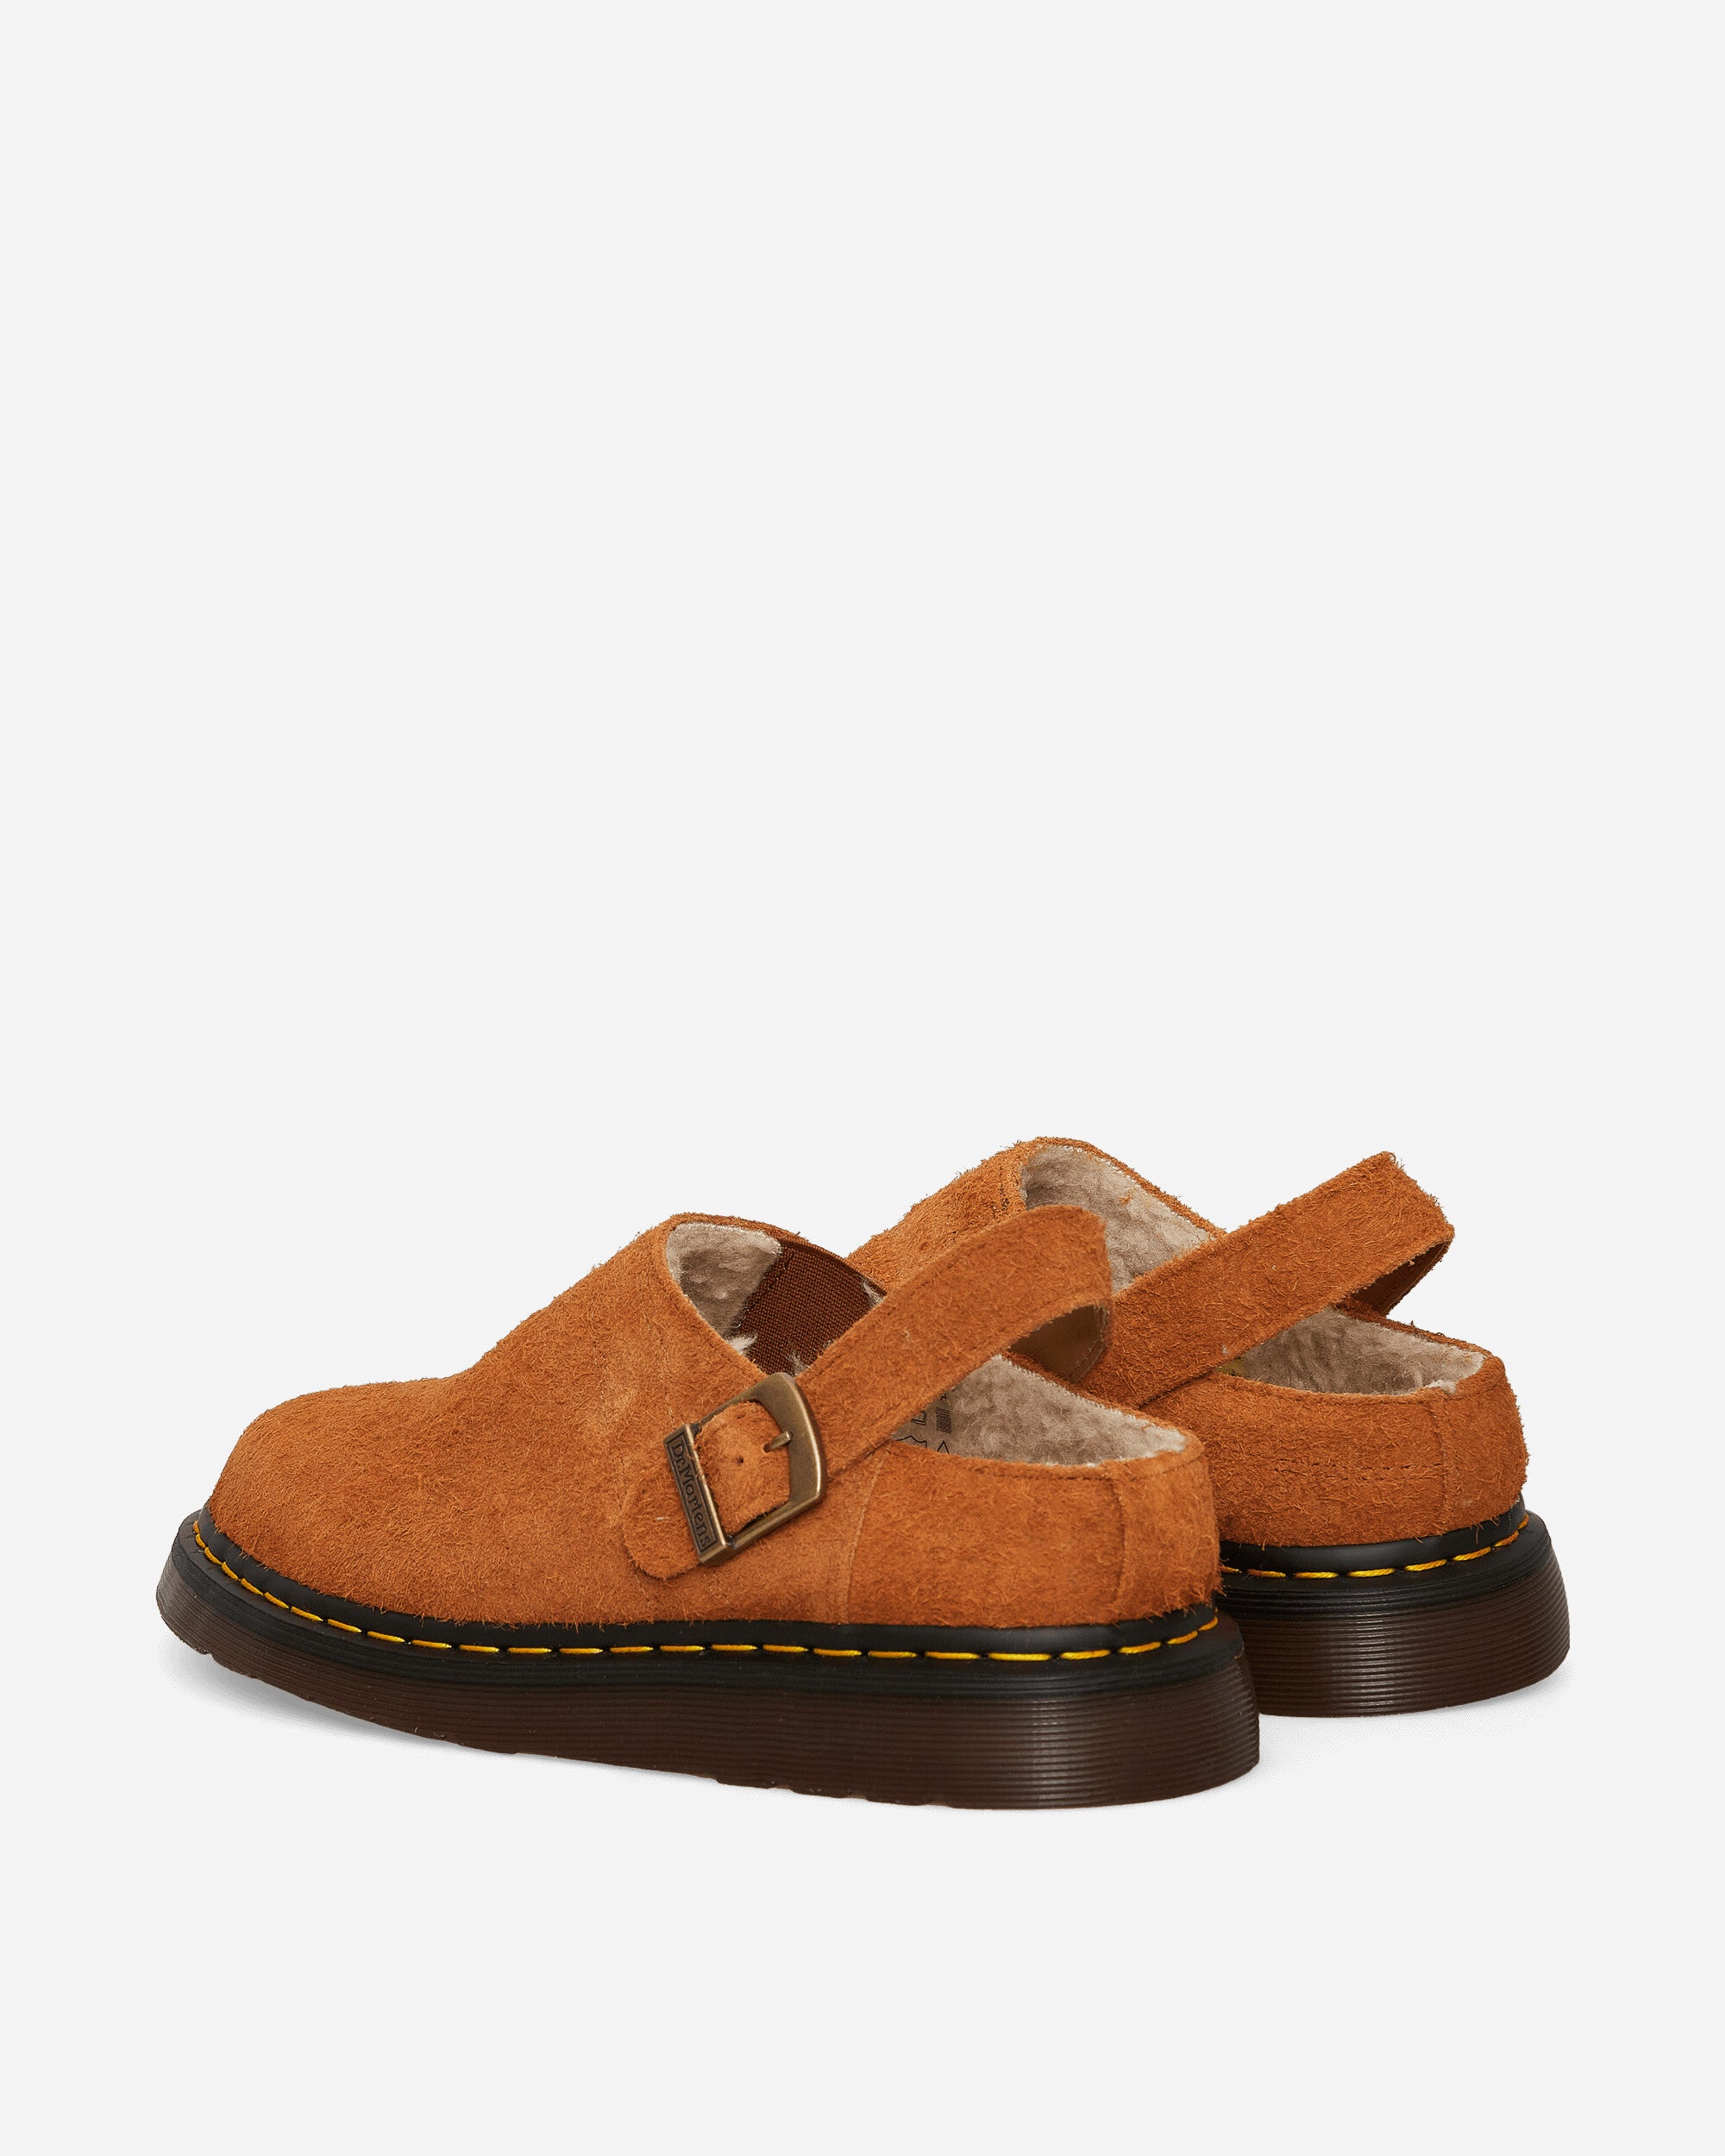 Dr. Martens Buckle Mule Isham Pecan Brown Napped Suede Sandals and Slides Sandals and Mules 30901363 001